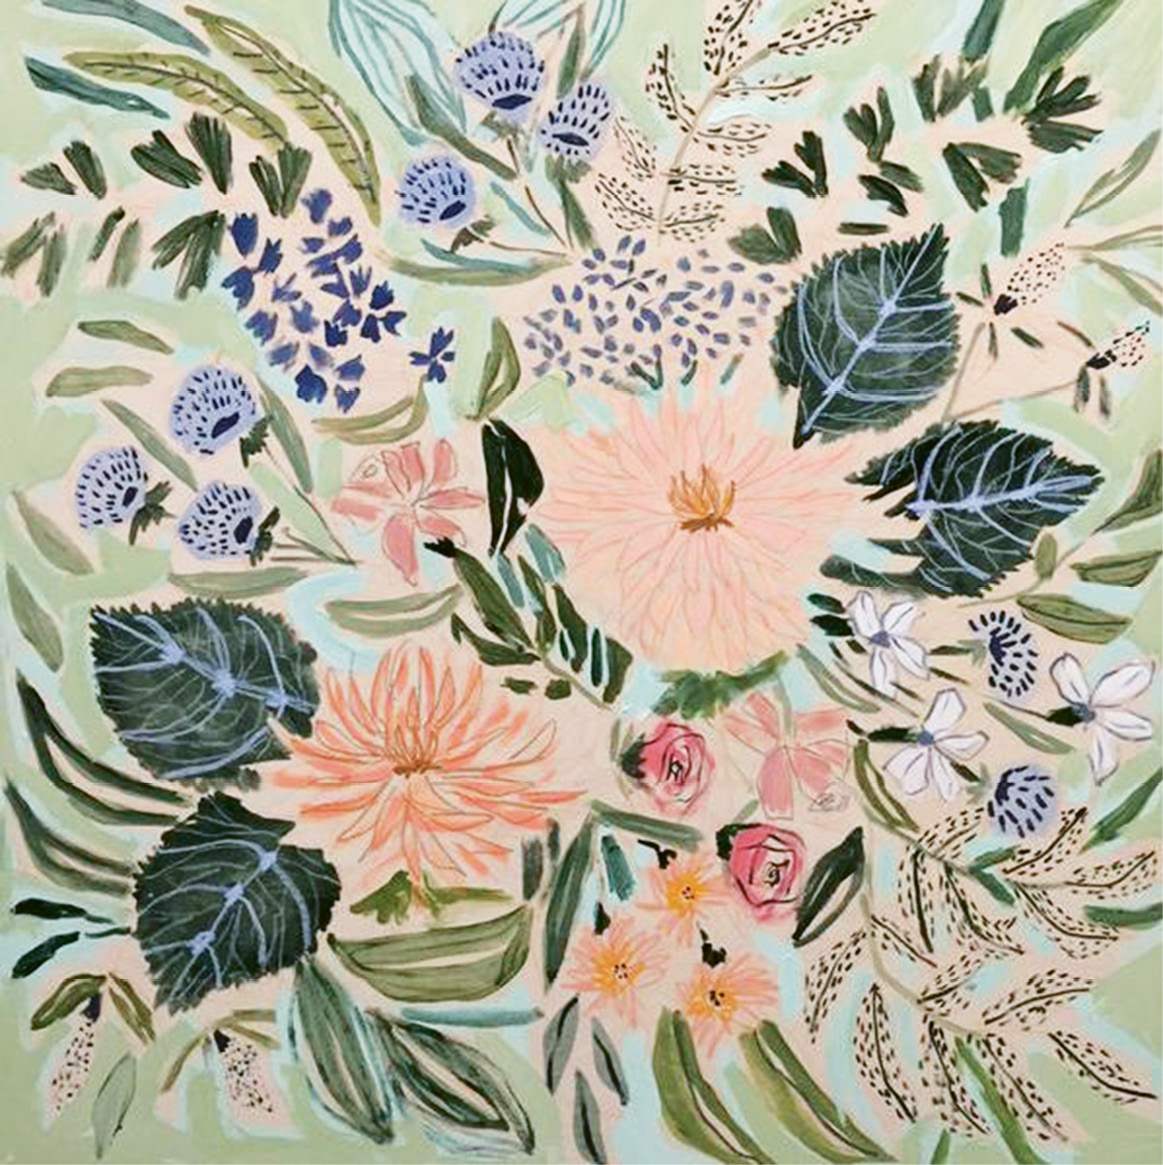 Painting (Flowers for Kate by Lulie Wallace, acrylic on canvas, 36 x 36 inches), $1,300 at luliewallace.com